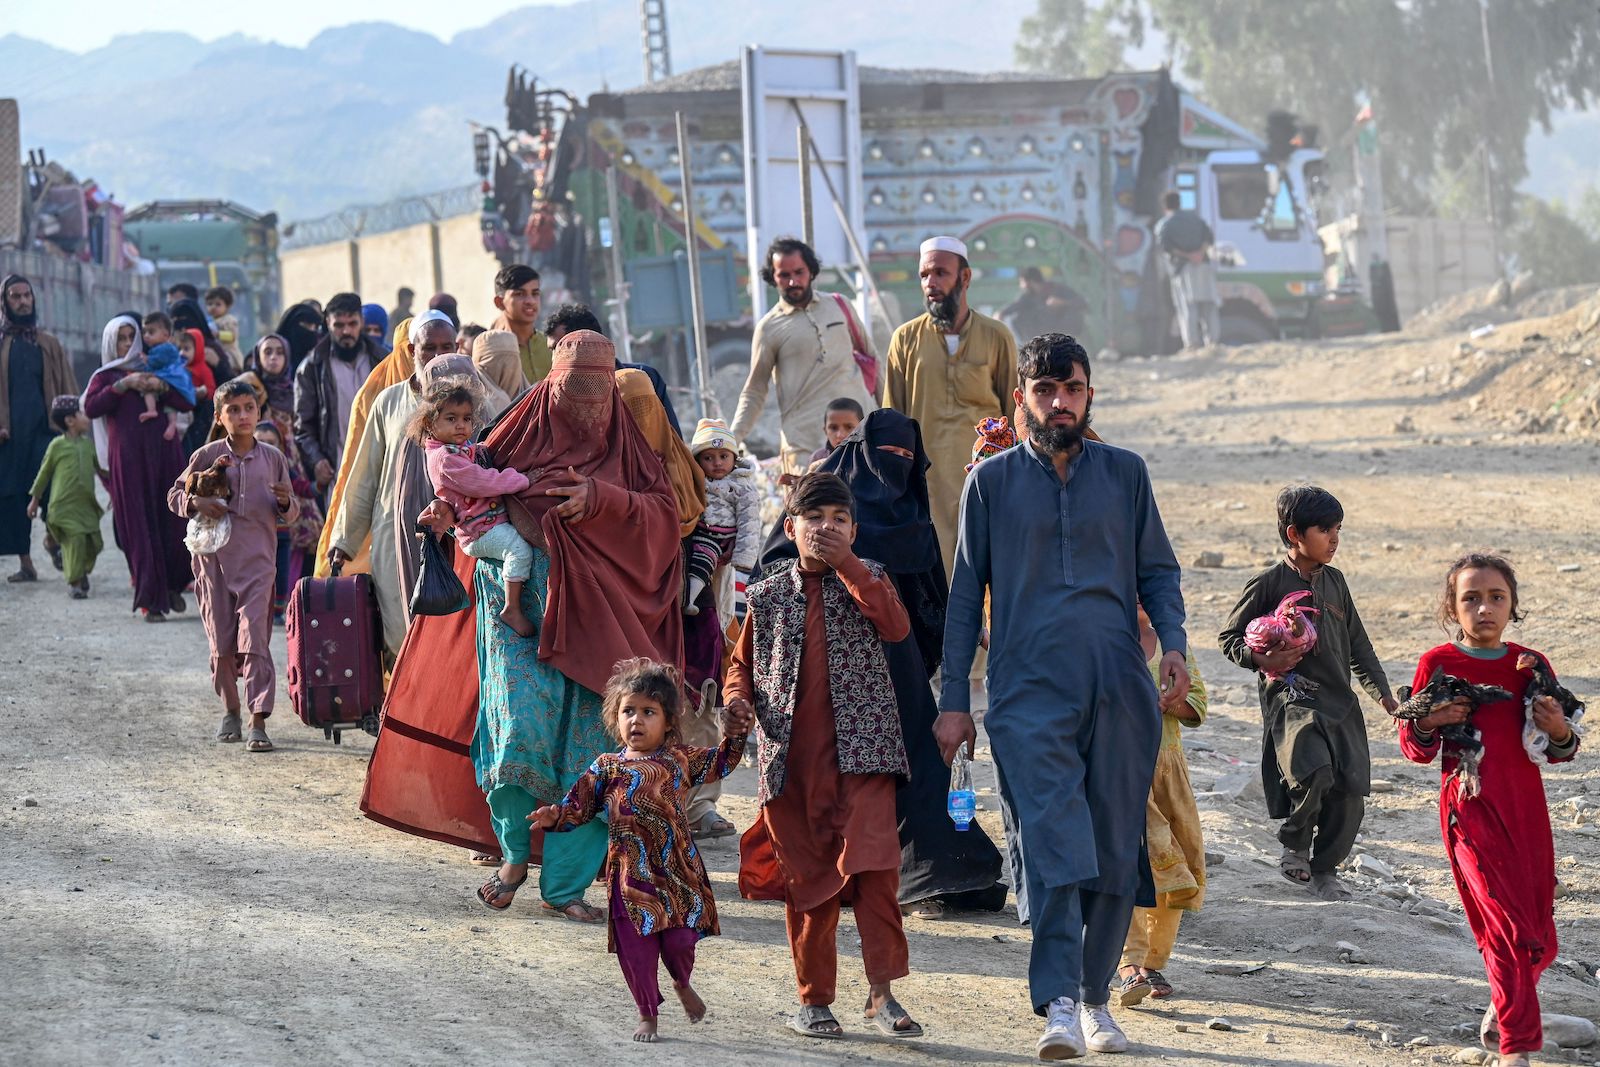 Pakistan Is Starting To Arrest And Mass Deport Thousands of Afghan Refugees Back To The Taliban-Controlled Afghanistan